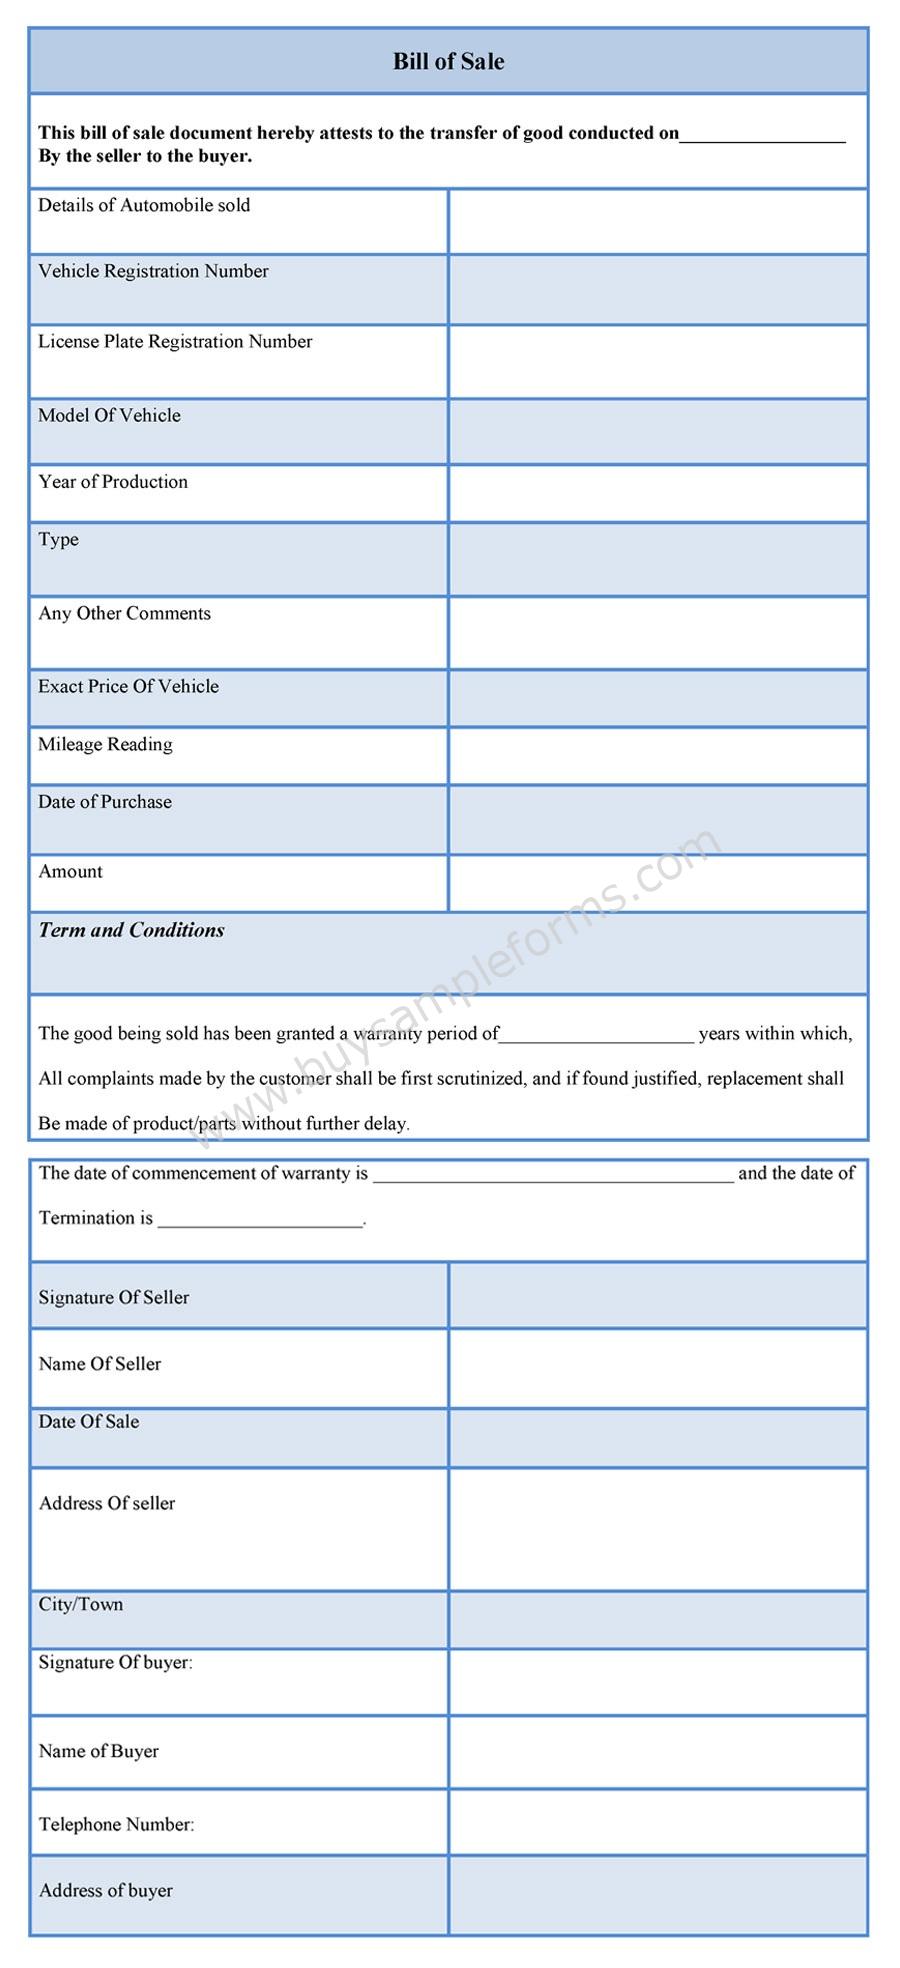 Free Bill of Sale form - Sample Forms